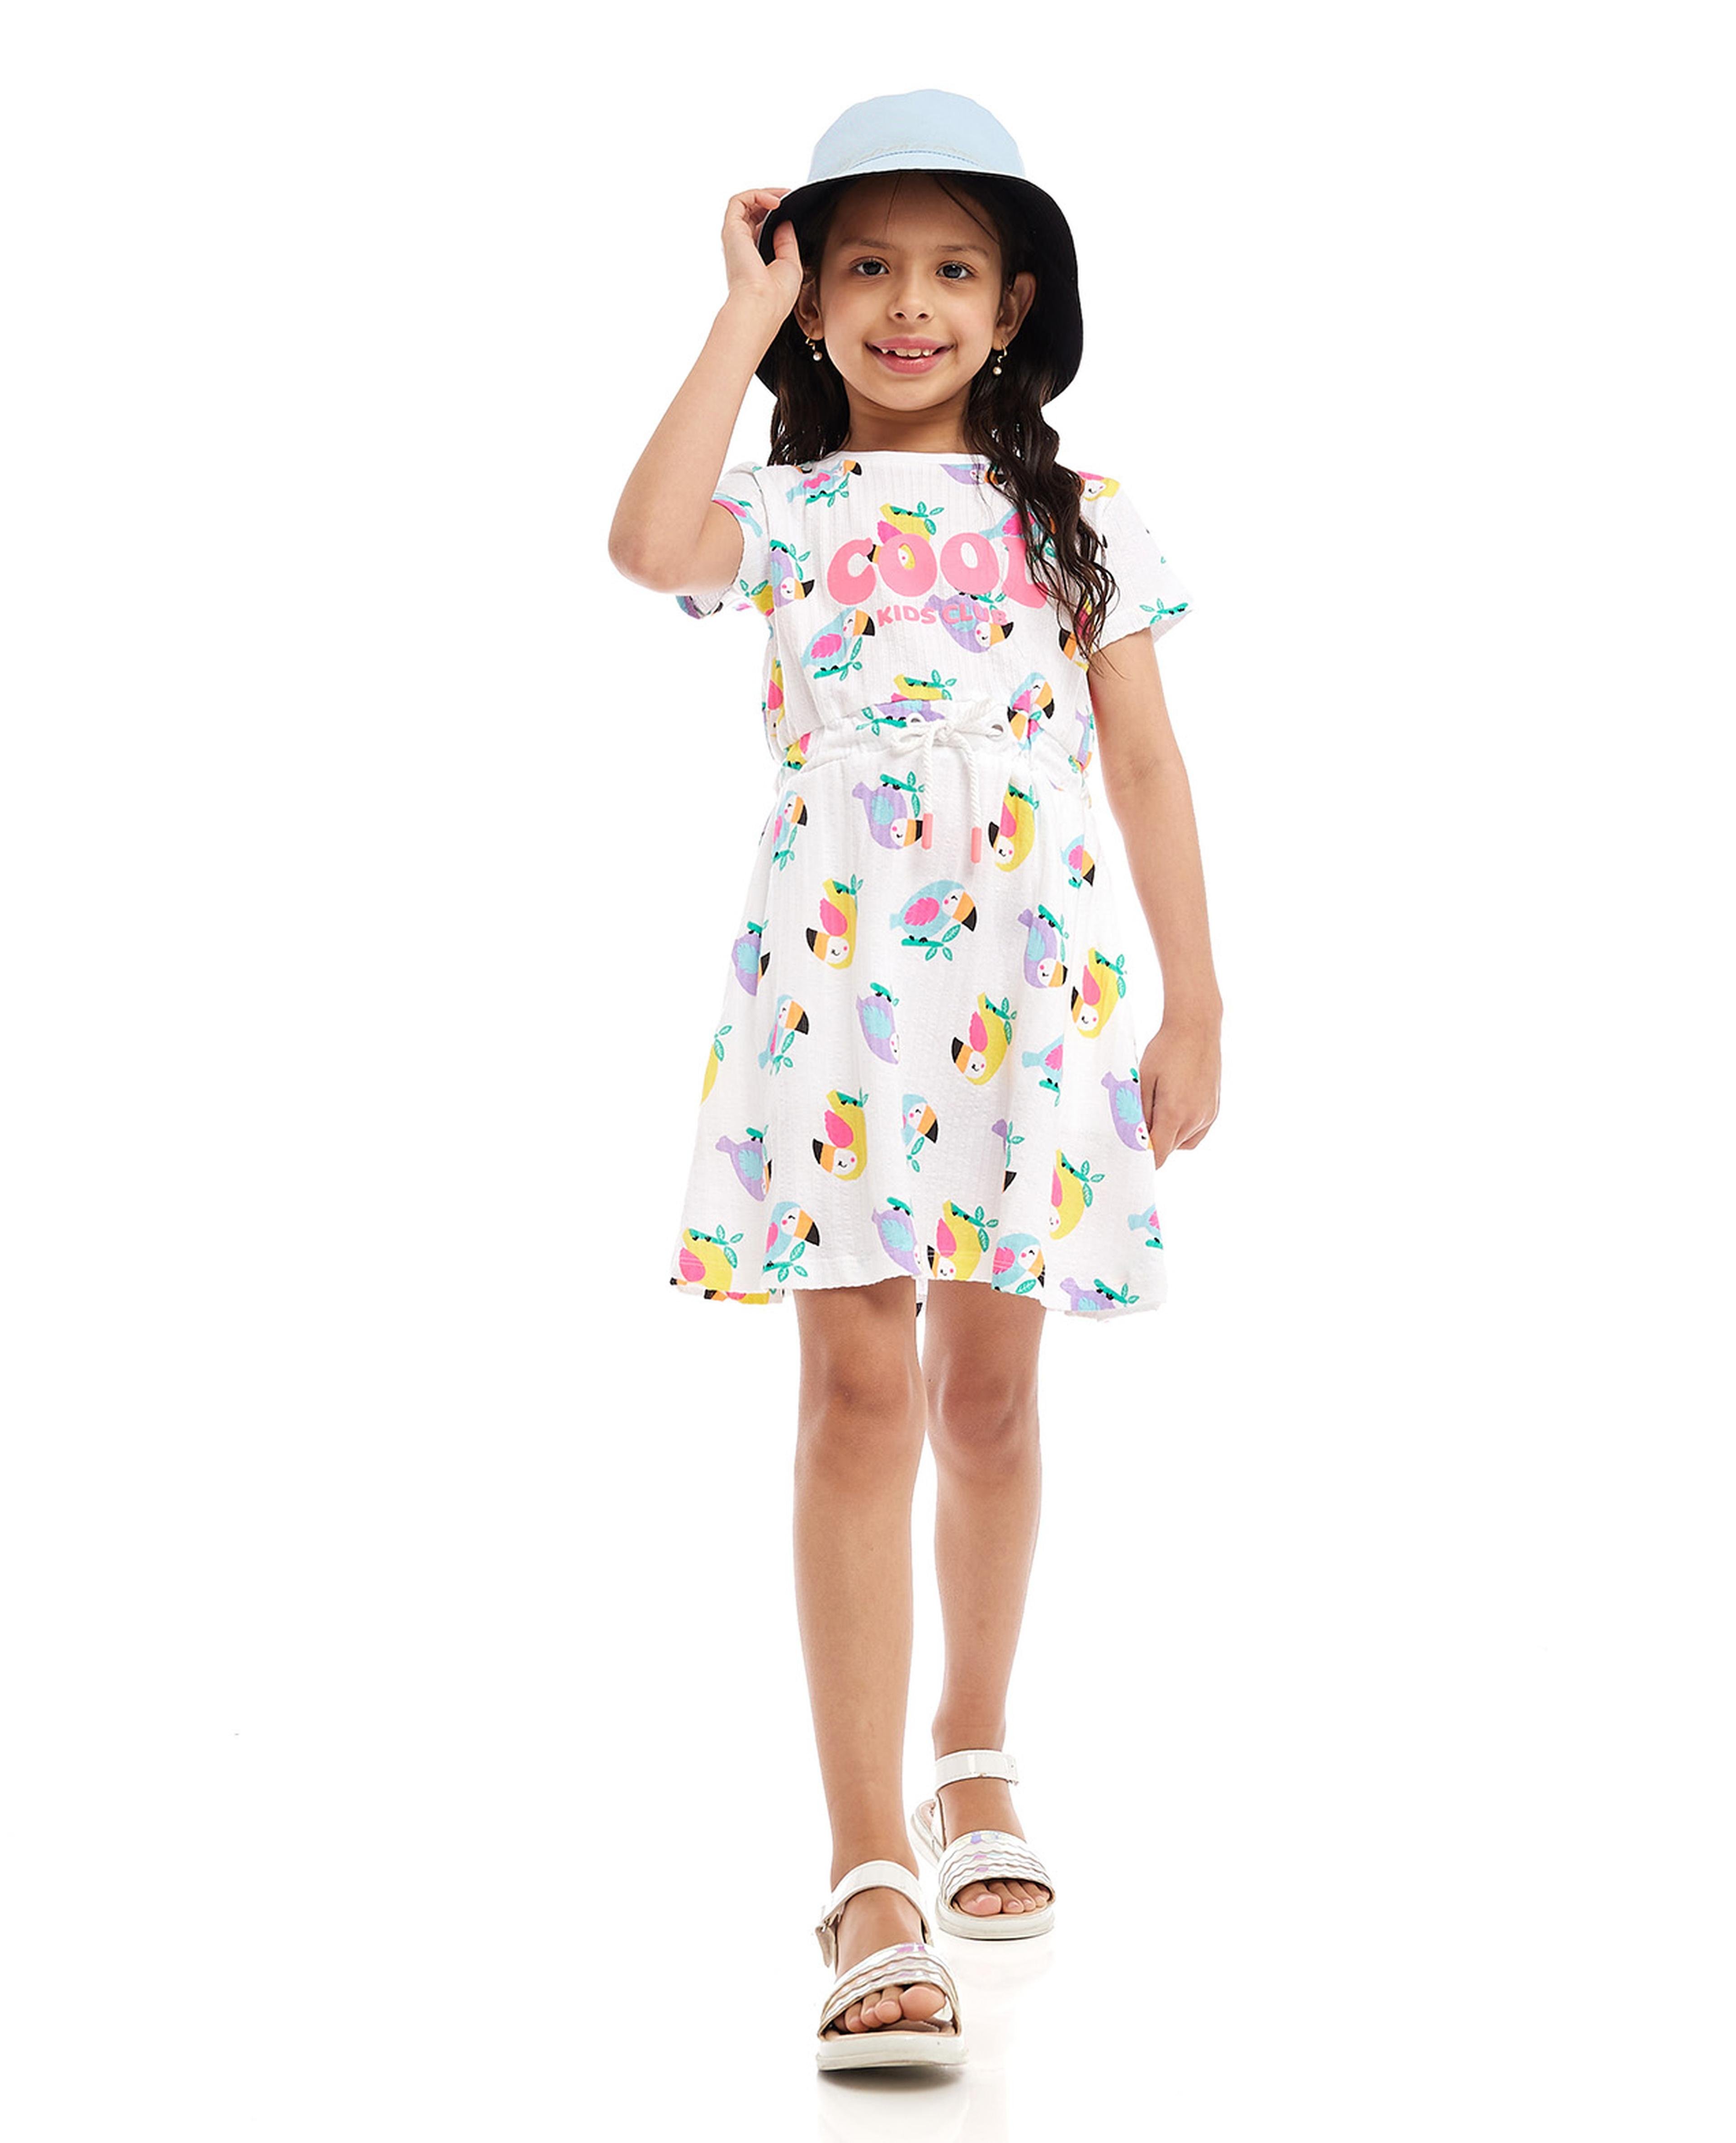 Printed Fit and Flare Dress with Crew Nek and Short Sleeves